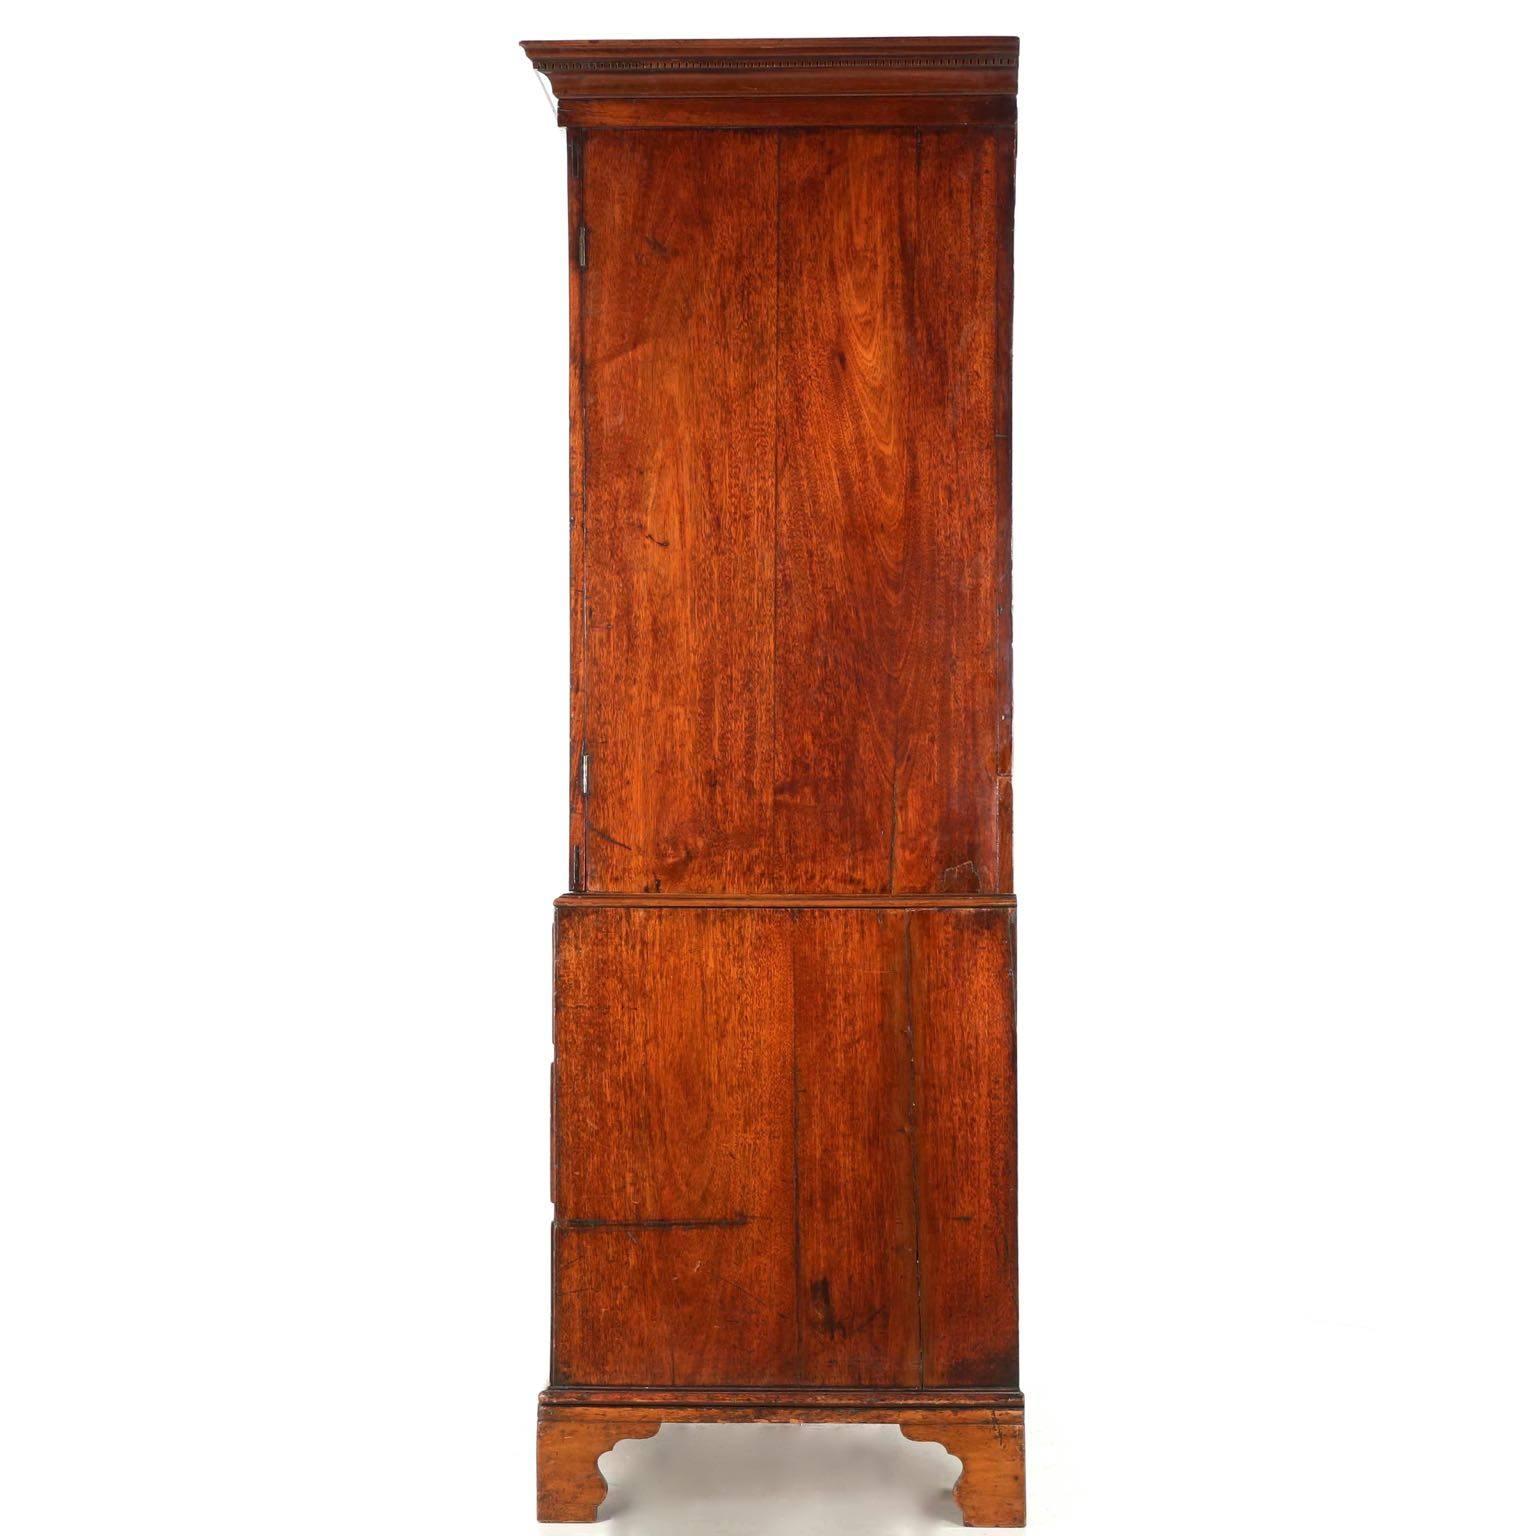 Late 18th Century English George III Mahogany Linen Press over Chest of Drawers, circa 1780